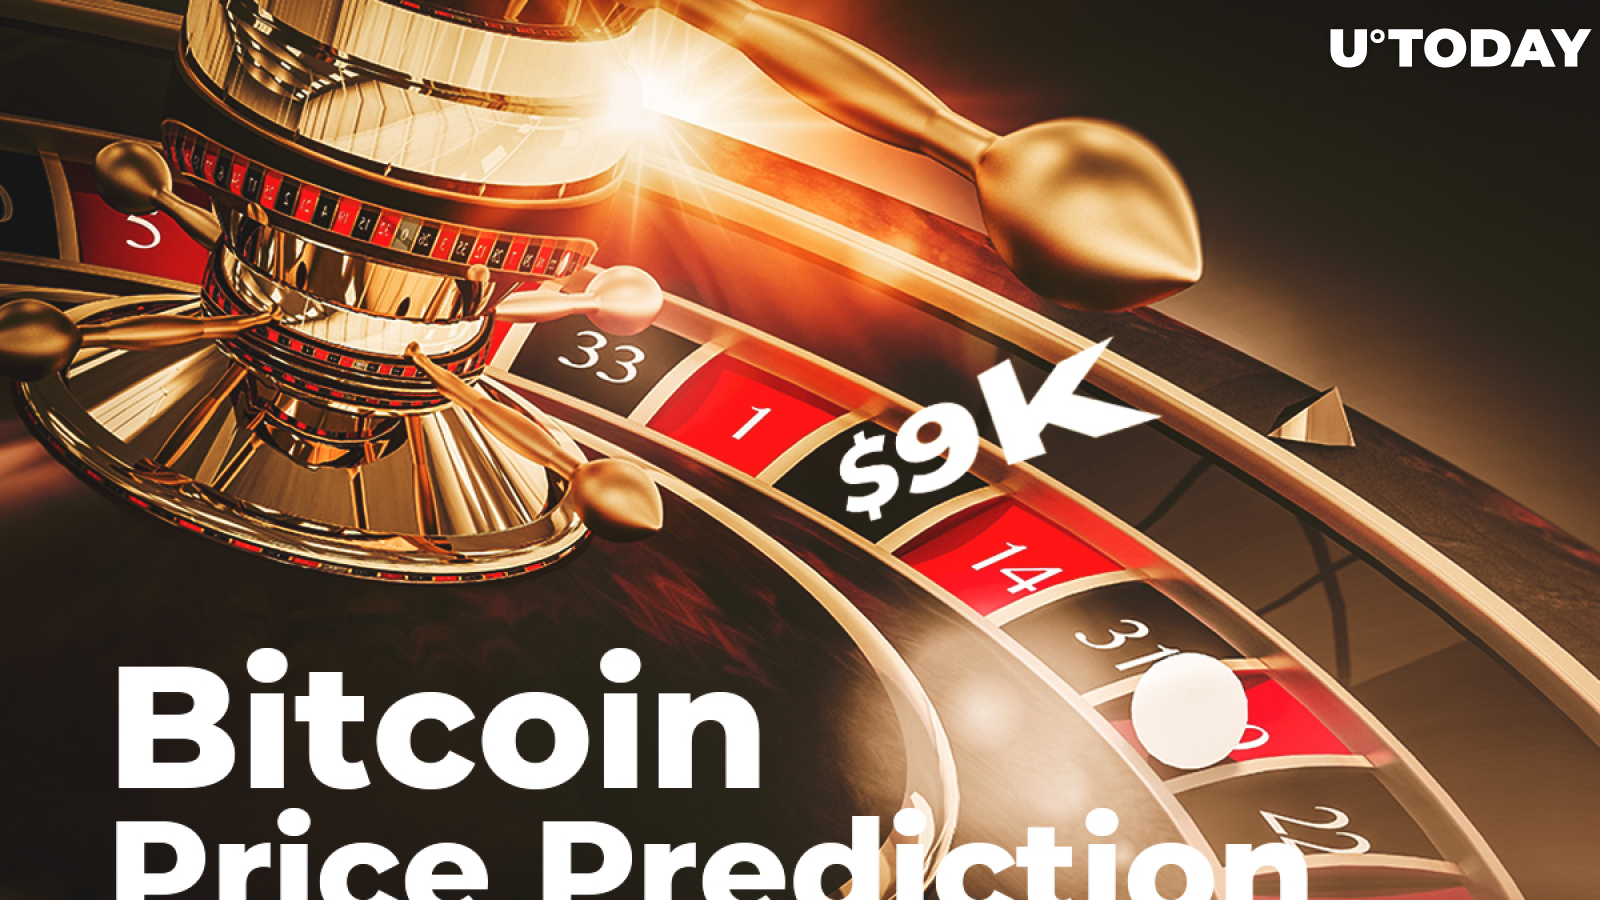 Bitcoin Price Prediction — Do Bulls Have the Power to Push BTC to $9,000?